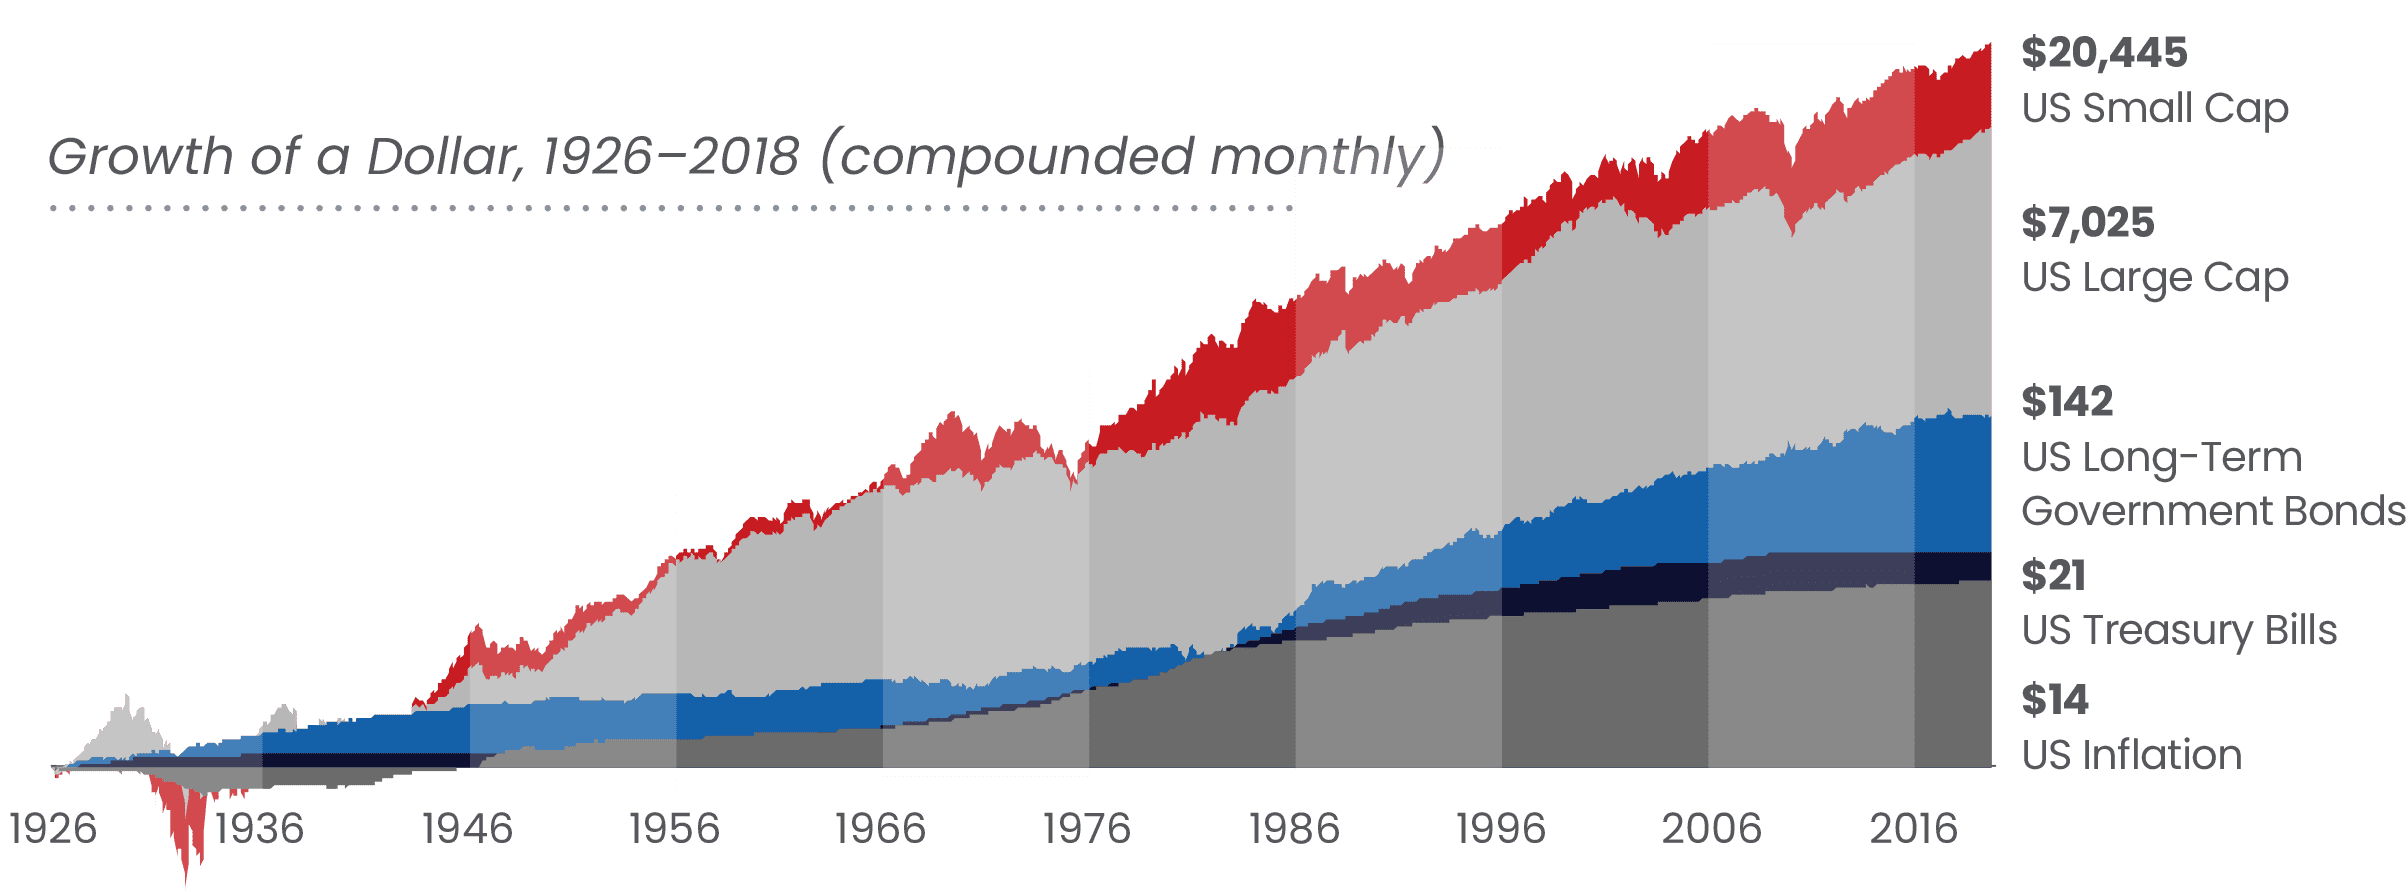 Dimensional Investment Group Dollar Growth